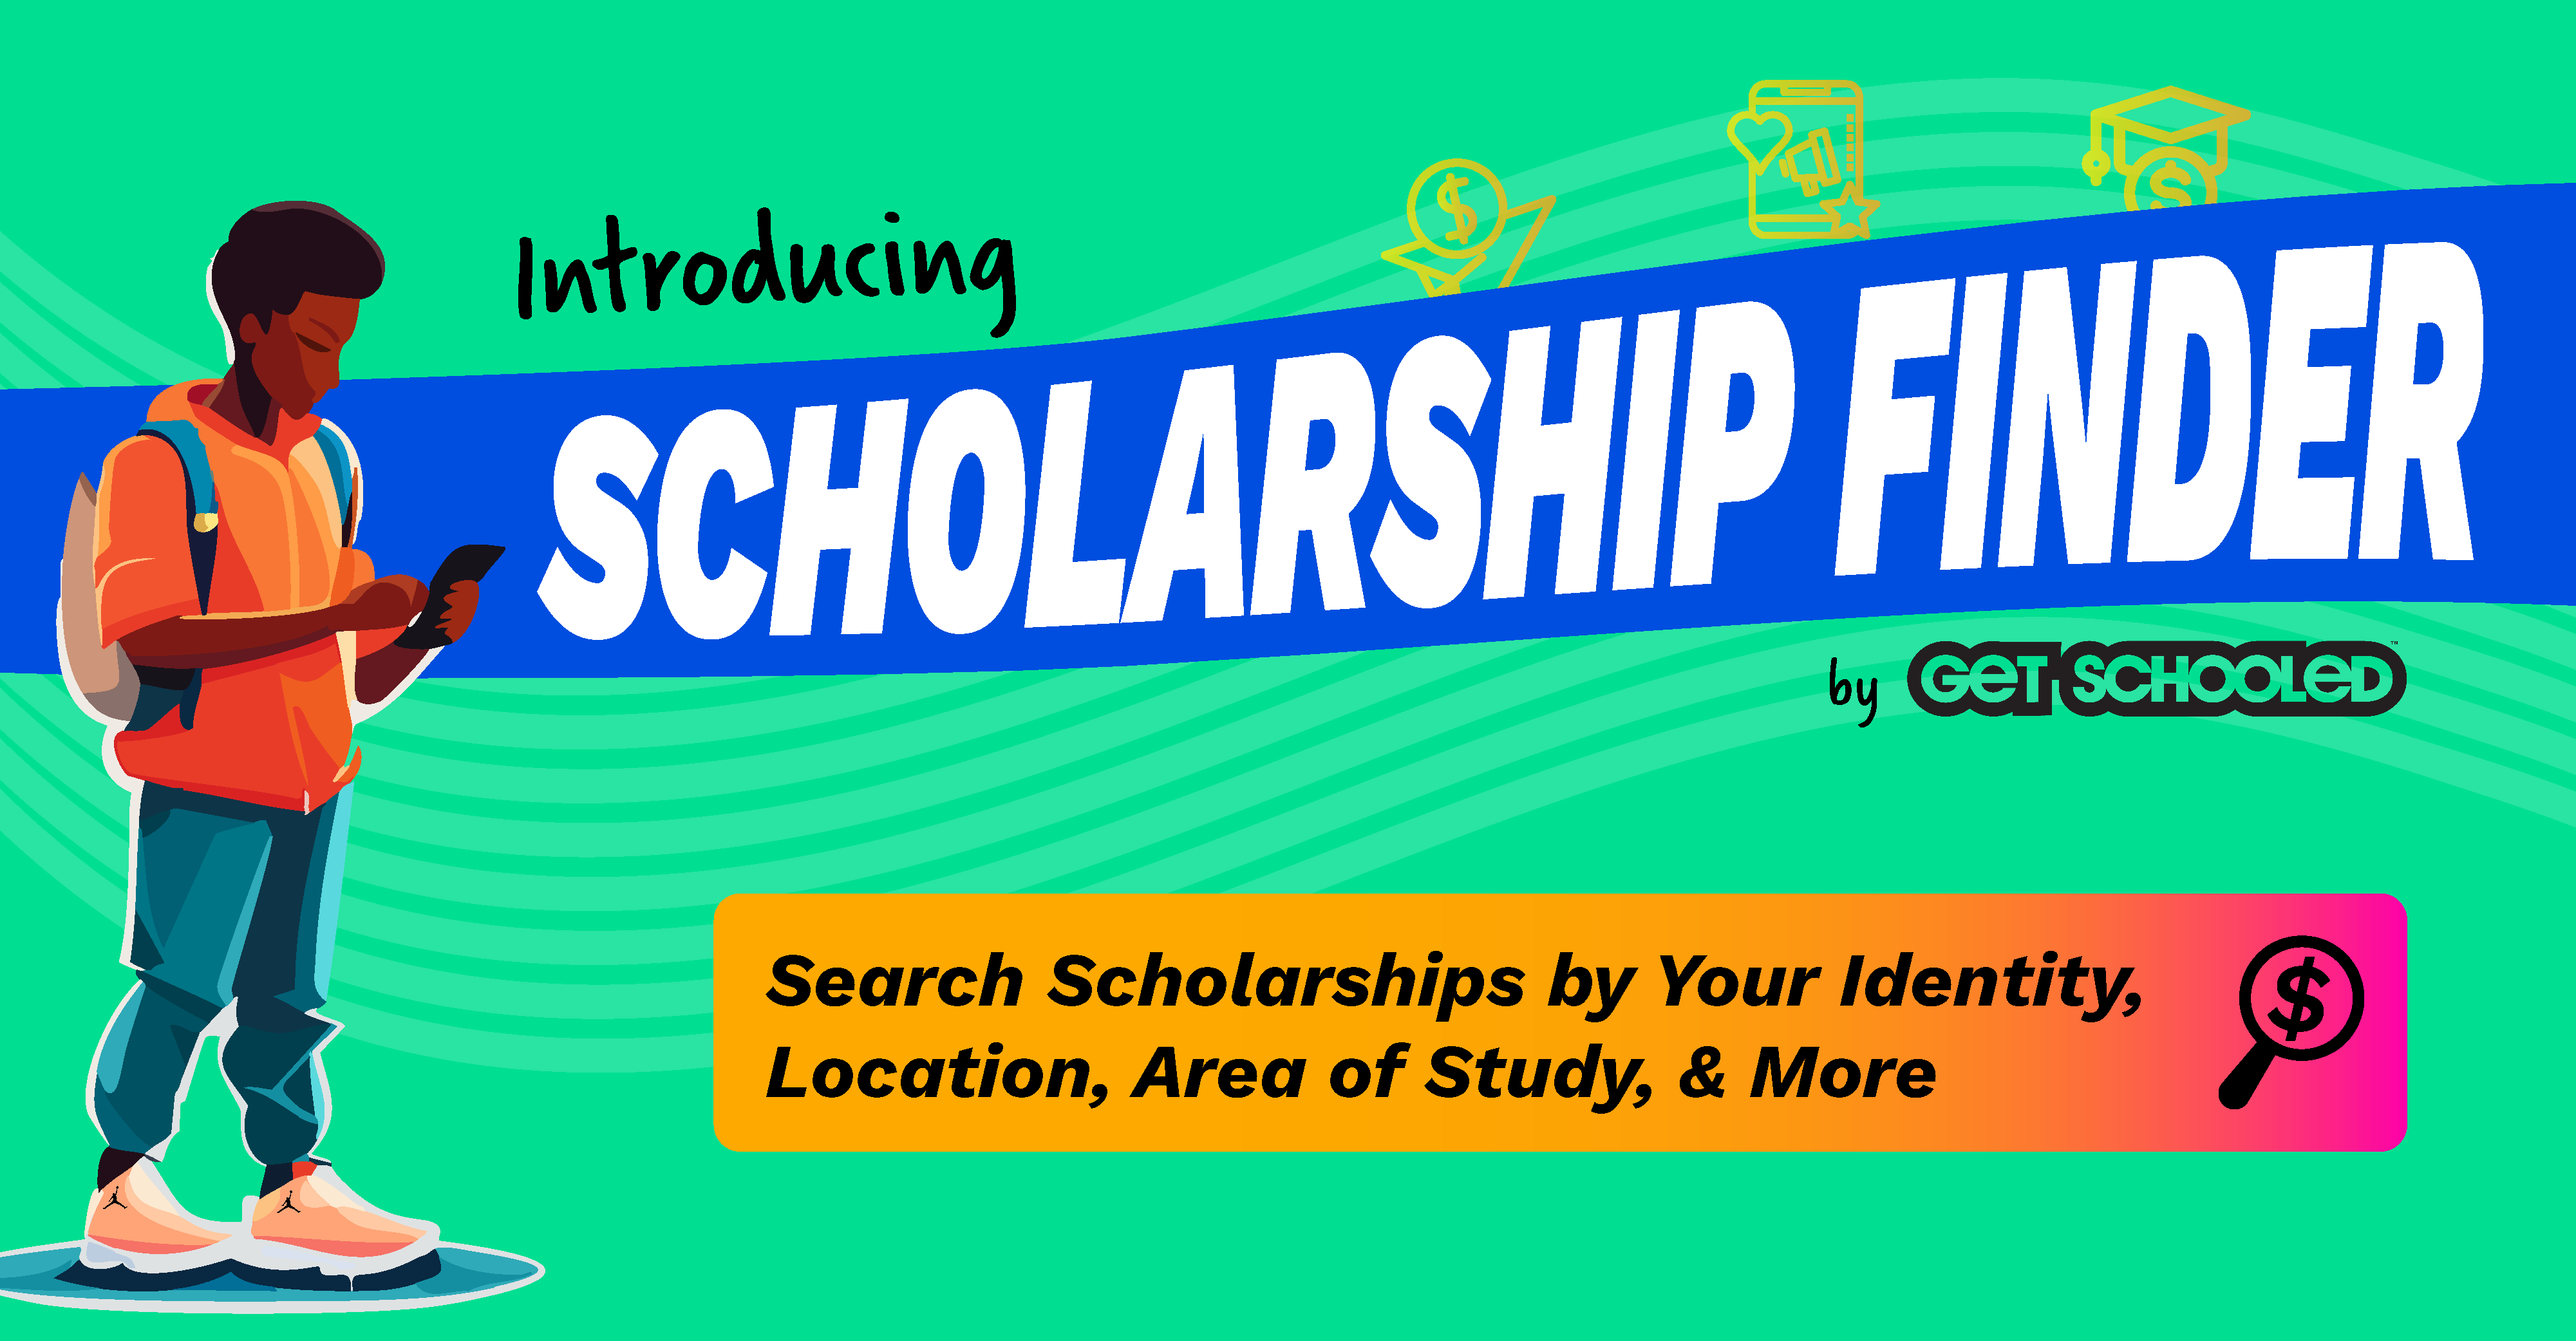 Illustration of a student (cartoon vector) with a backpack, gazing at their phone. The banner promotes the Get Schooled scholarship finder, stating, "Explore the Scholarship Finder by GET SCHOOLED: Discover Opportunities Based on Your Identity, Location, Area of Study, & More." - Easy Scholarships That You Can Apply to Right Now!